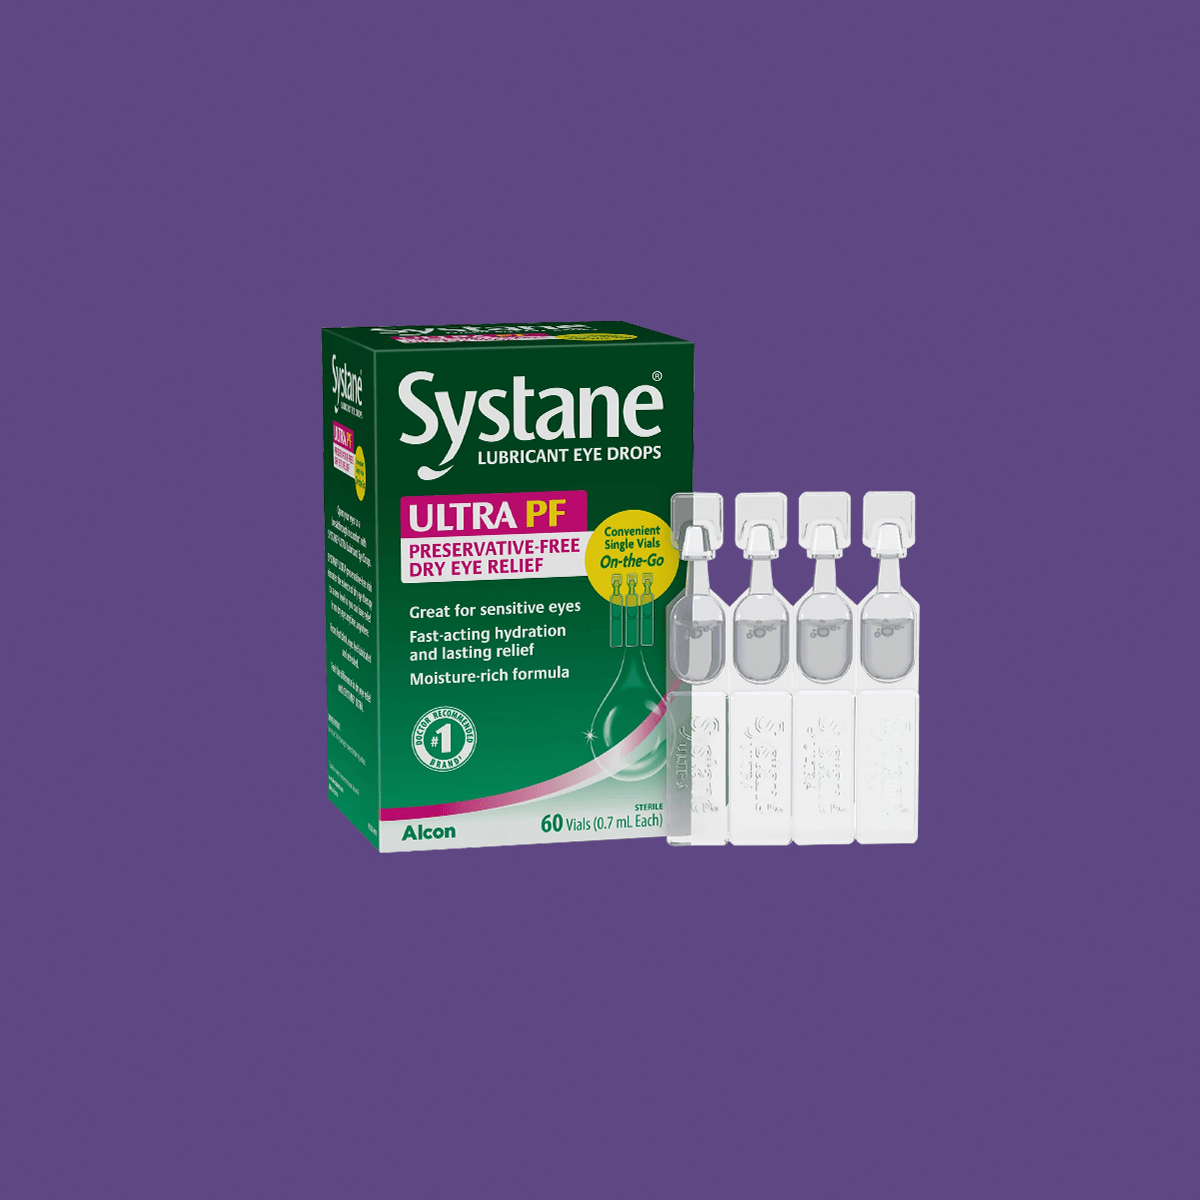 Systane Ultra PF Preservative Free Dry Eye Relief for Sensitive Eyes (60 Vials) - Dryeye Rescue